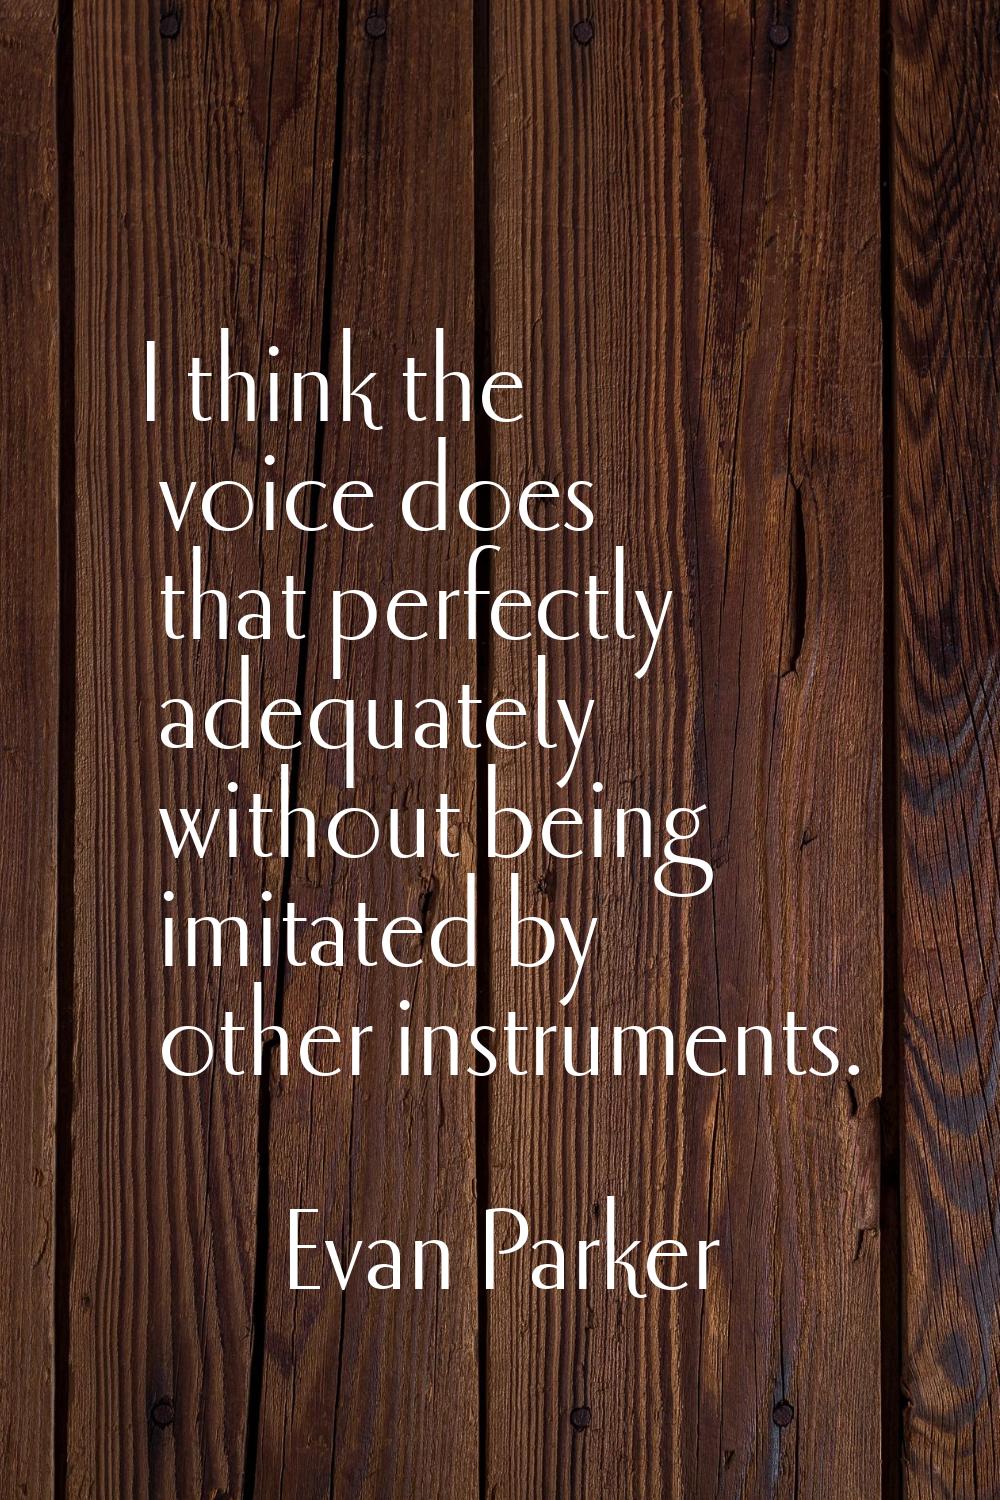 I think the voice does that perfectly adequately without being imitated by other instruments.